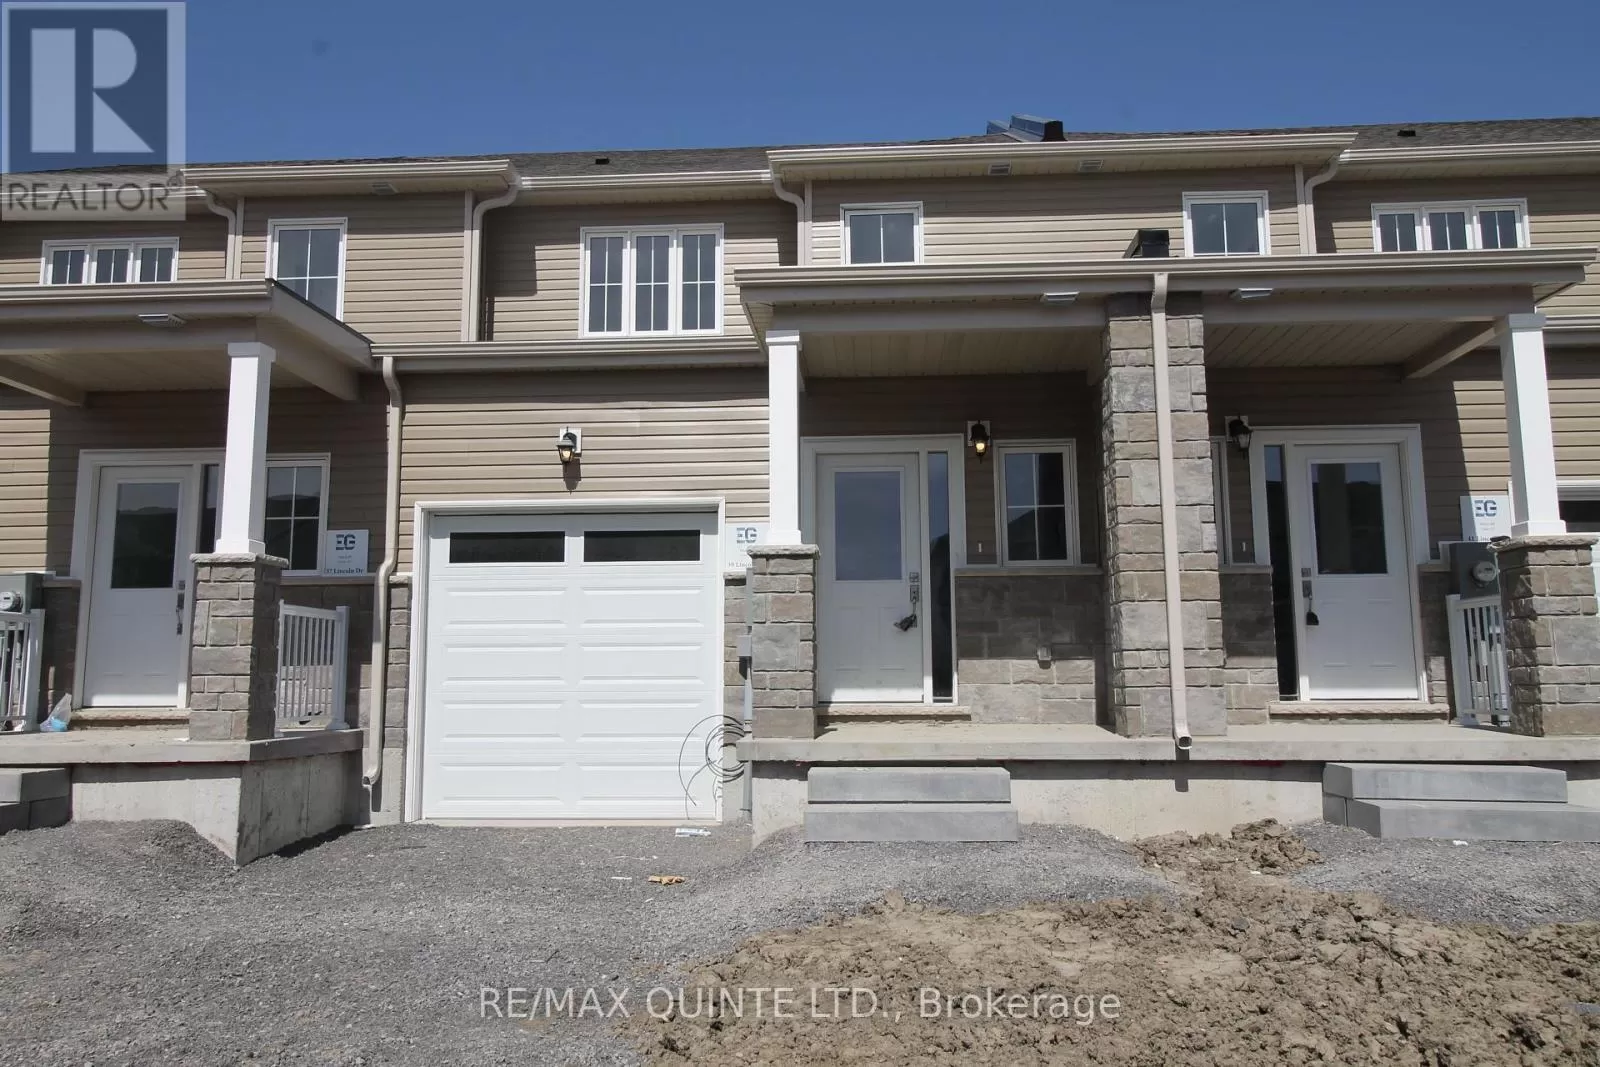 Row / Townhouse for rent: 39 Lincoln Dr, Belleville, Ontario K8N 0T7